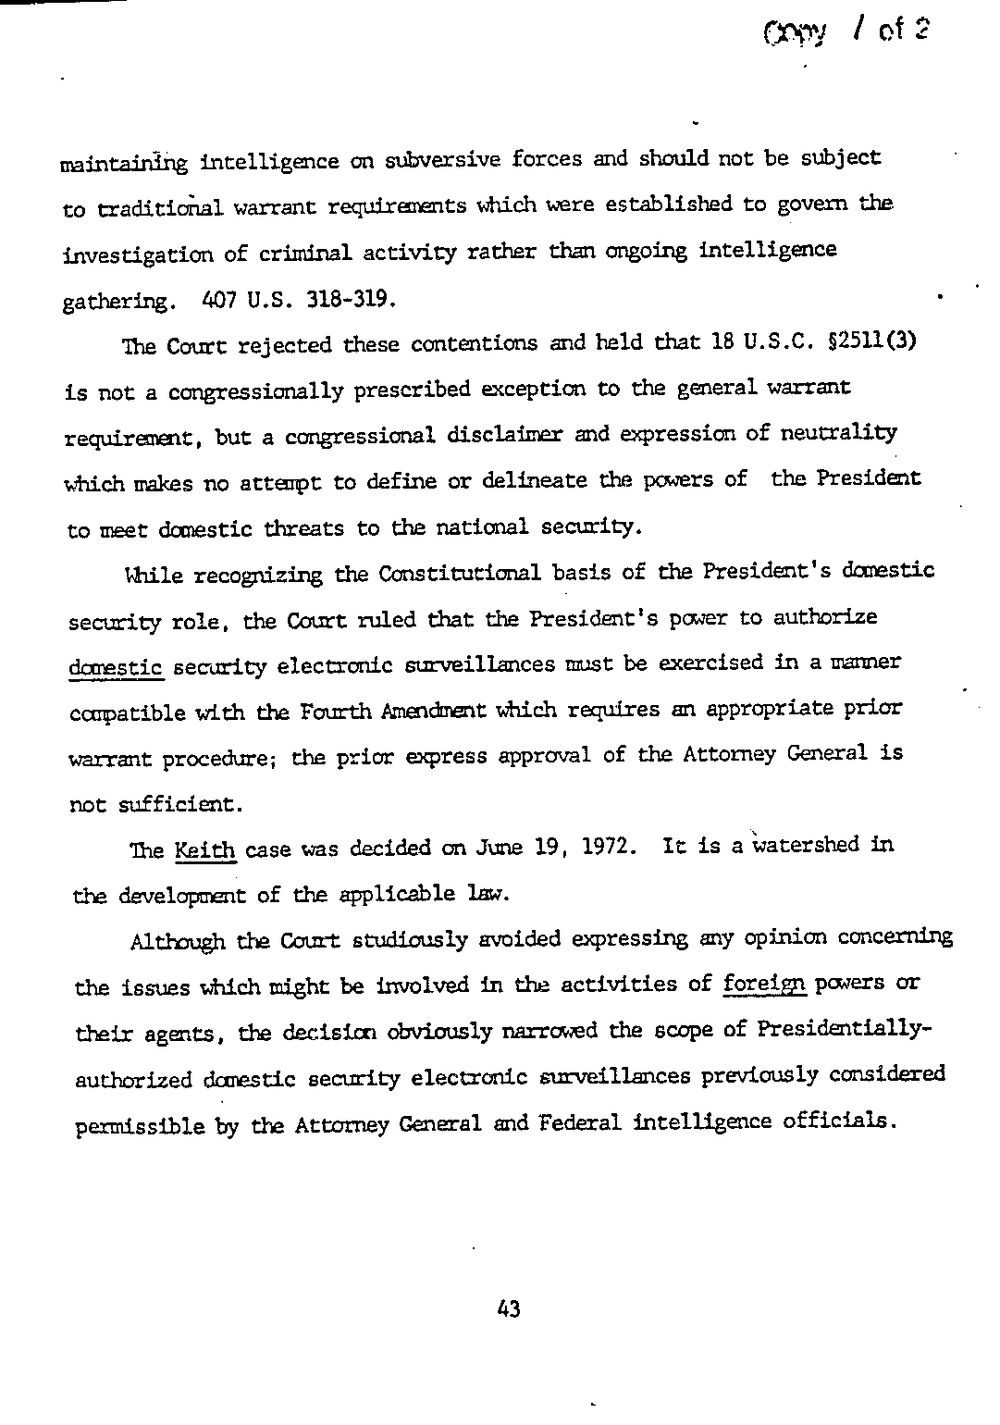 Page 51 from Report on Inquiry Into CIA Related Electronic Surveillance Activities